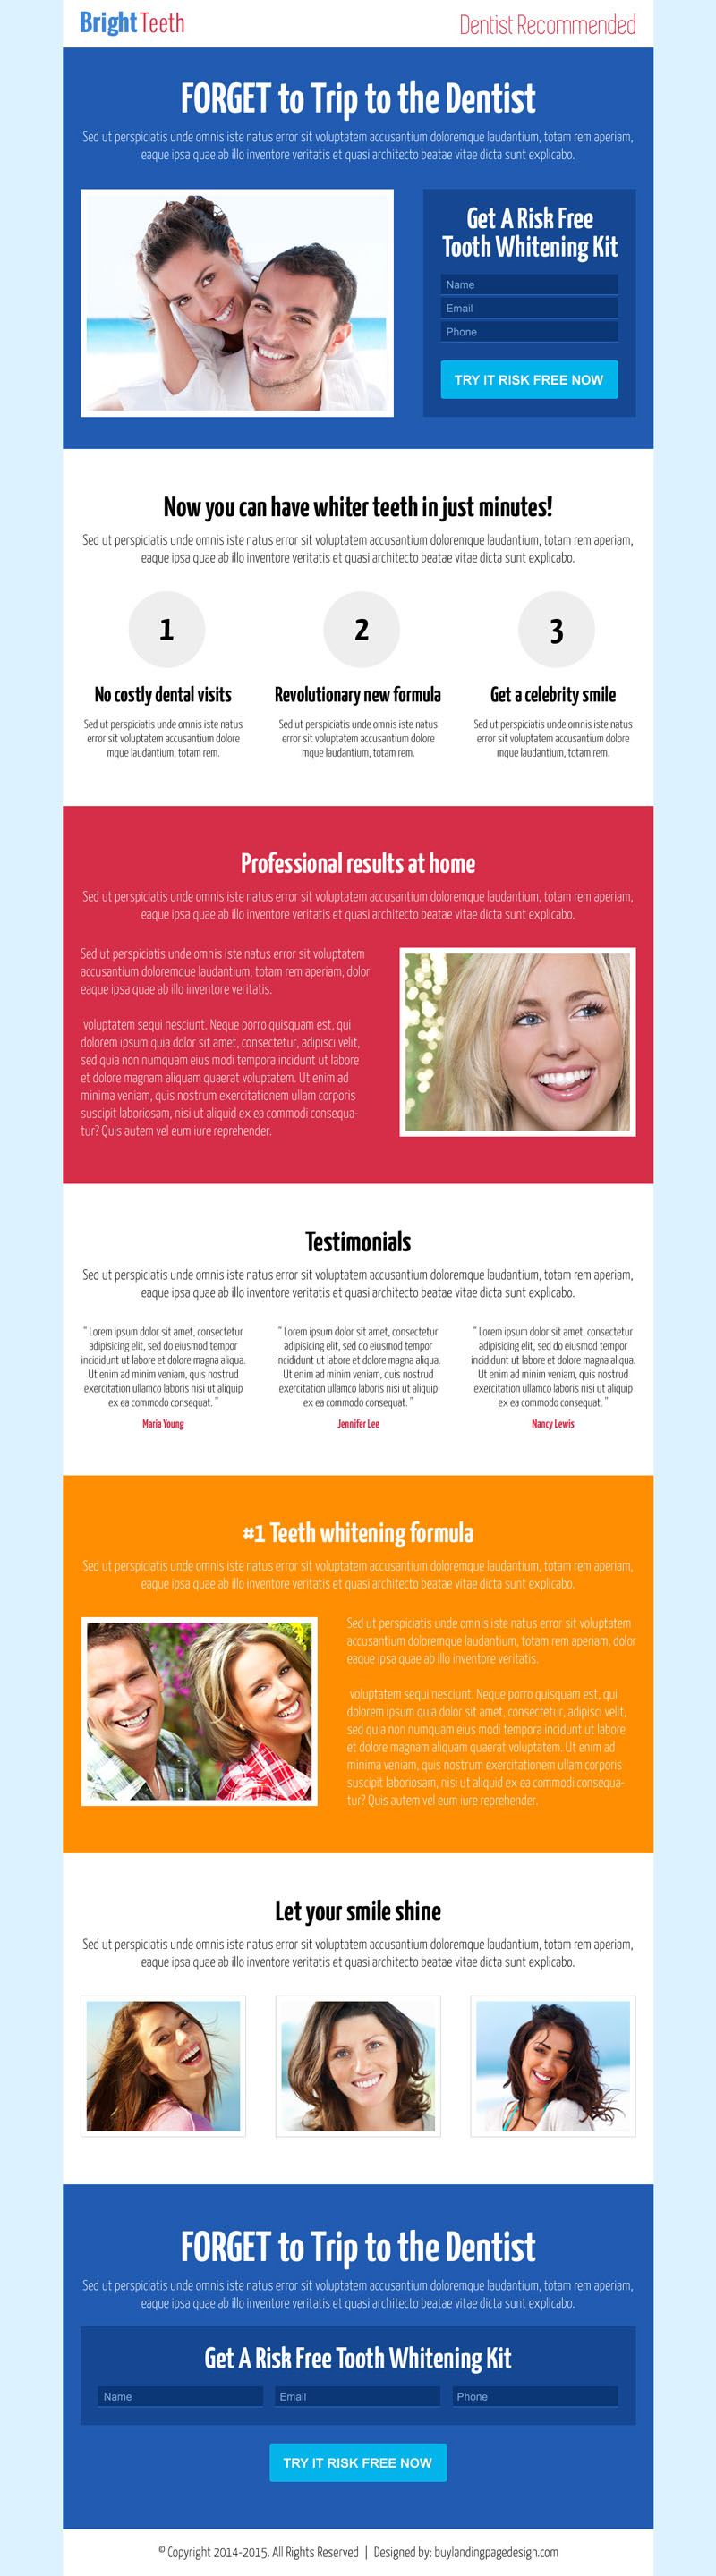 risk-free-teeth-whitening-kit-selling-lead-capture-effective-landing-page-design-templates-015